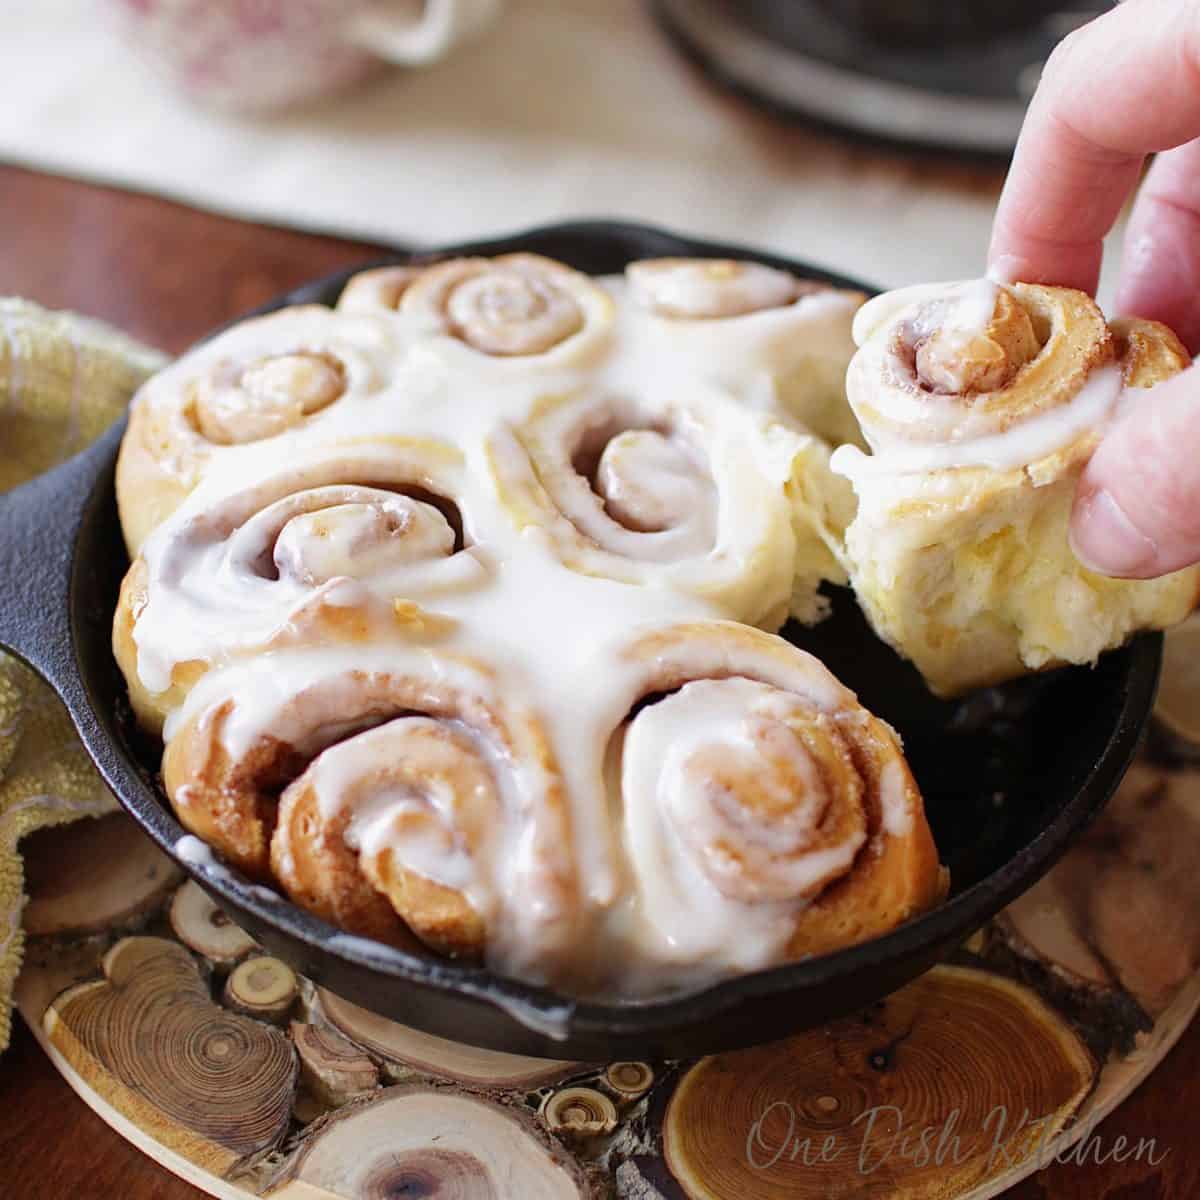 Pulling a small cinnamon roll out of a small skillet filled with cinnamon rolls topped with frosting on a trivet.